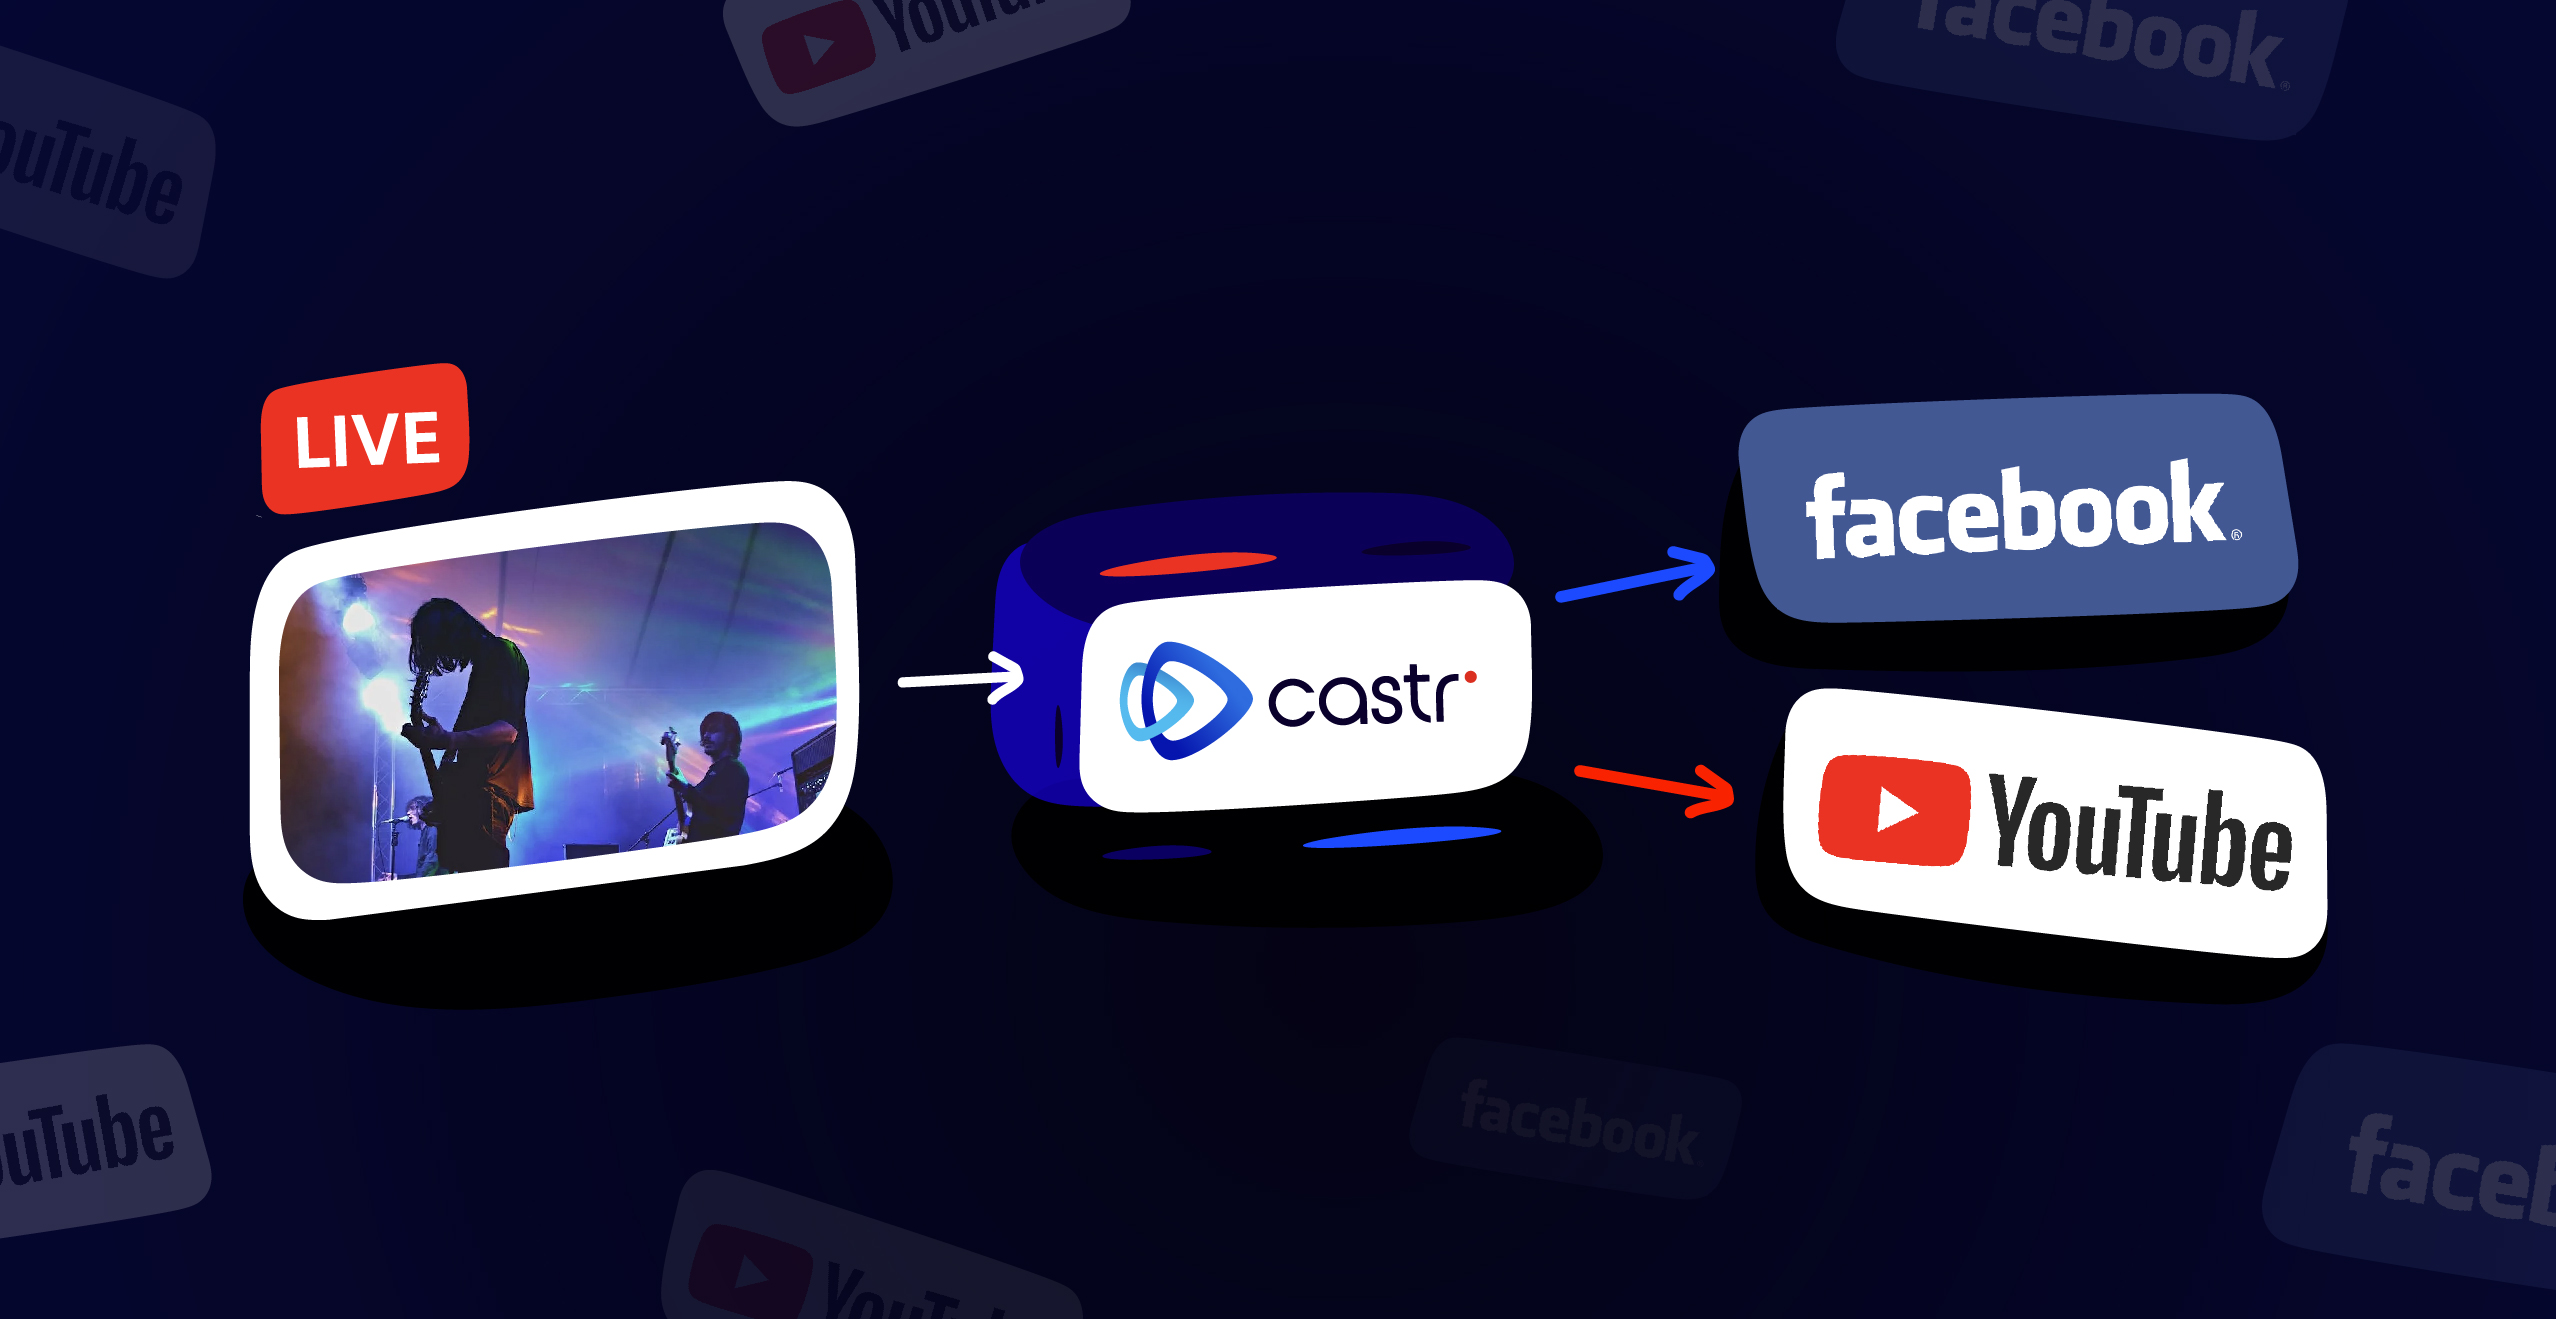 How to stream to Facebook and Youtube at the same time?